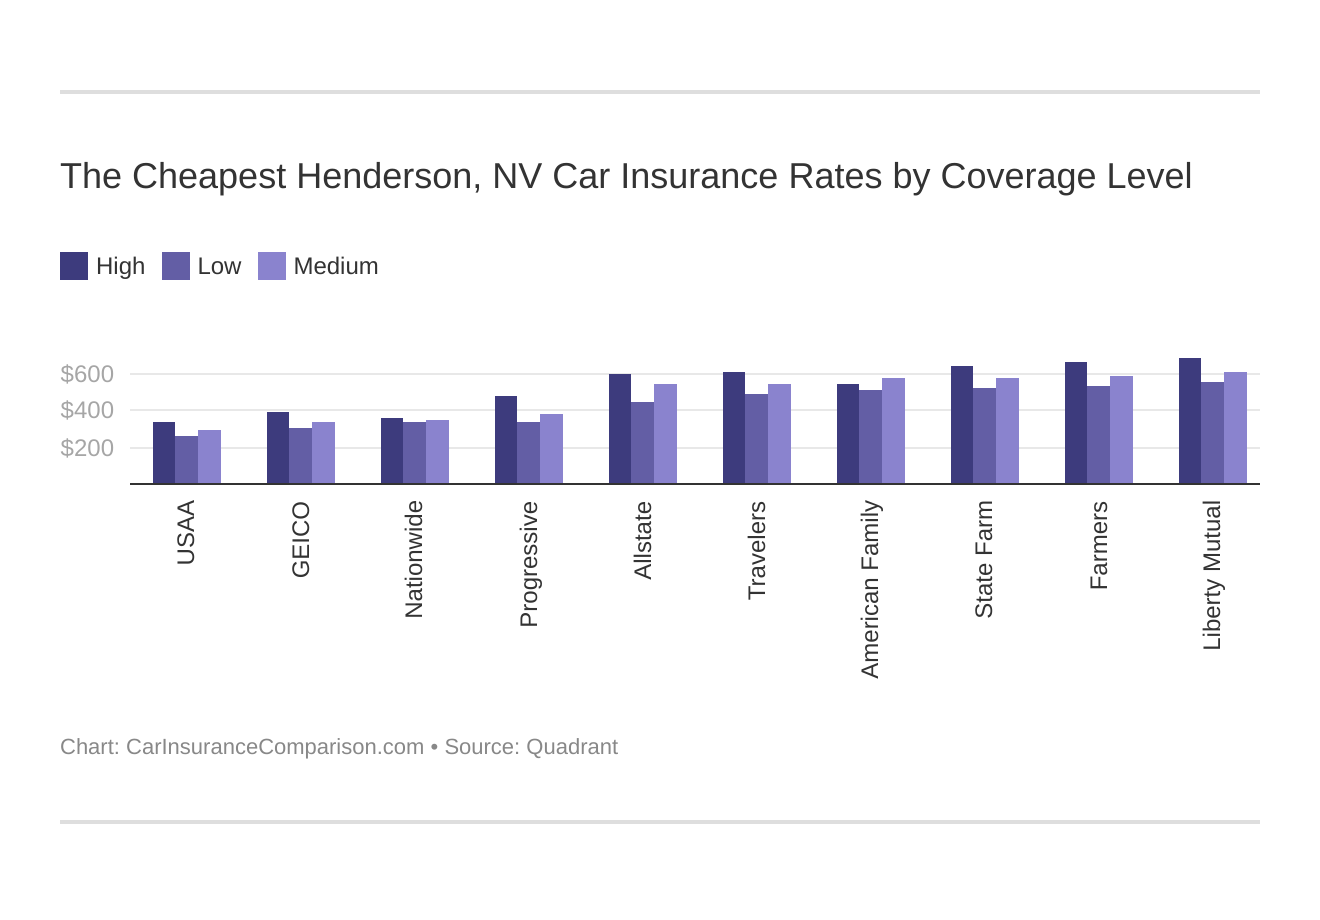 The Cheapest Henderson, NV Car Insurance Rates by Coverage Level